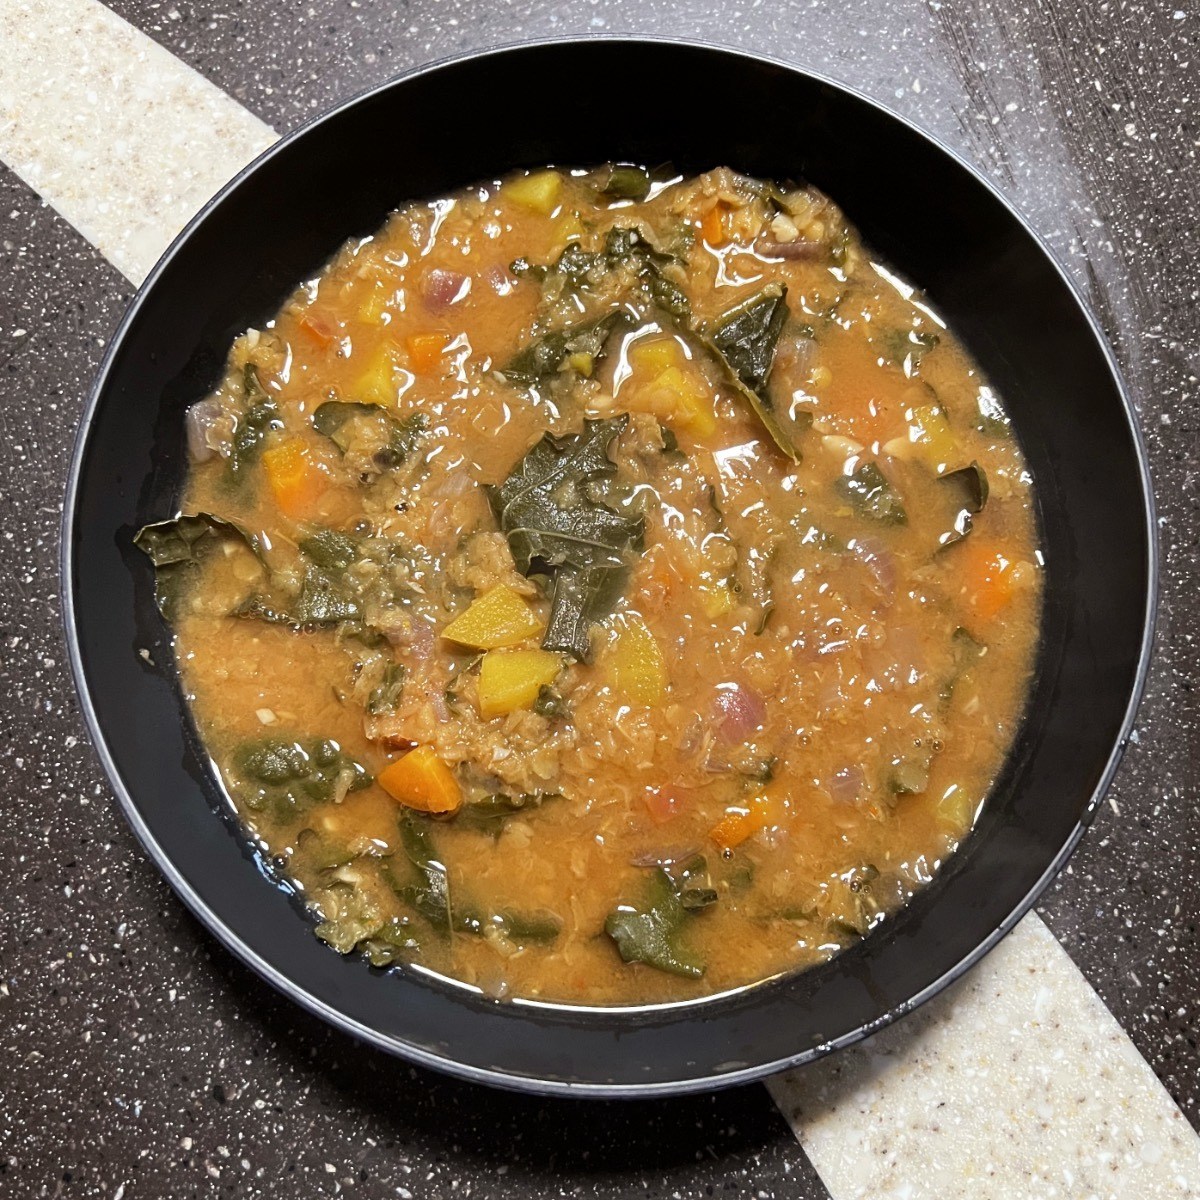 a black bowl of red lentil soup with greens.